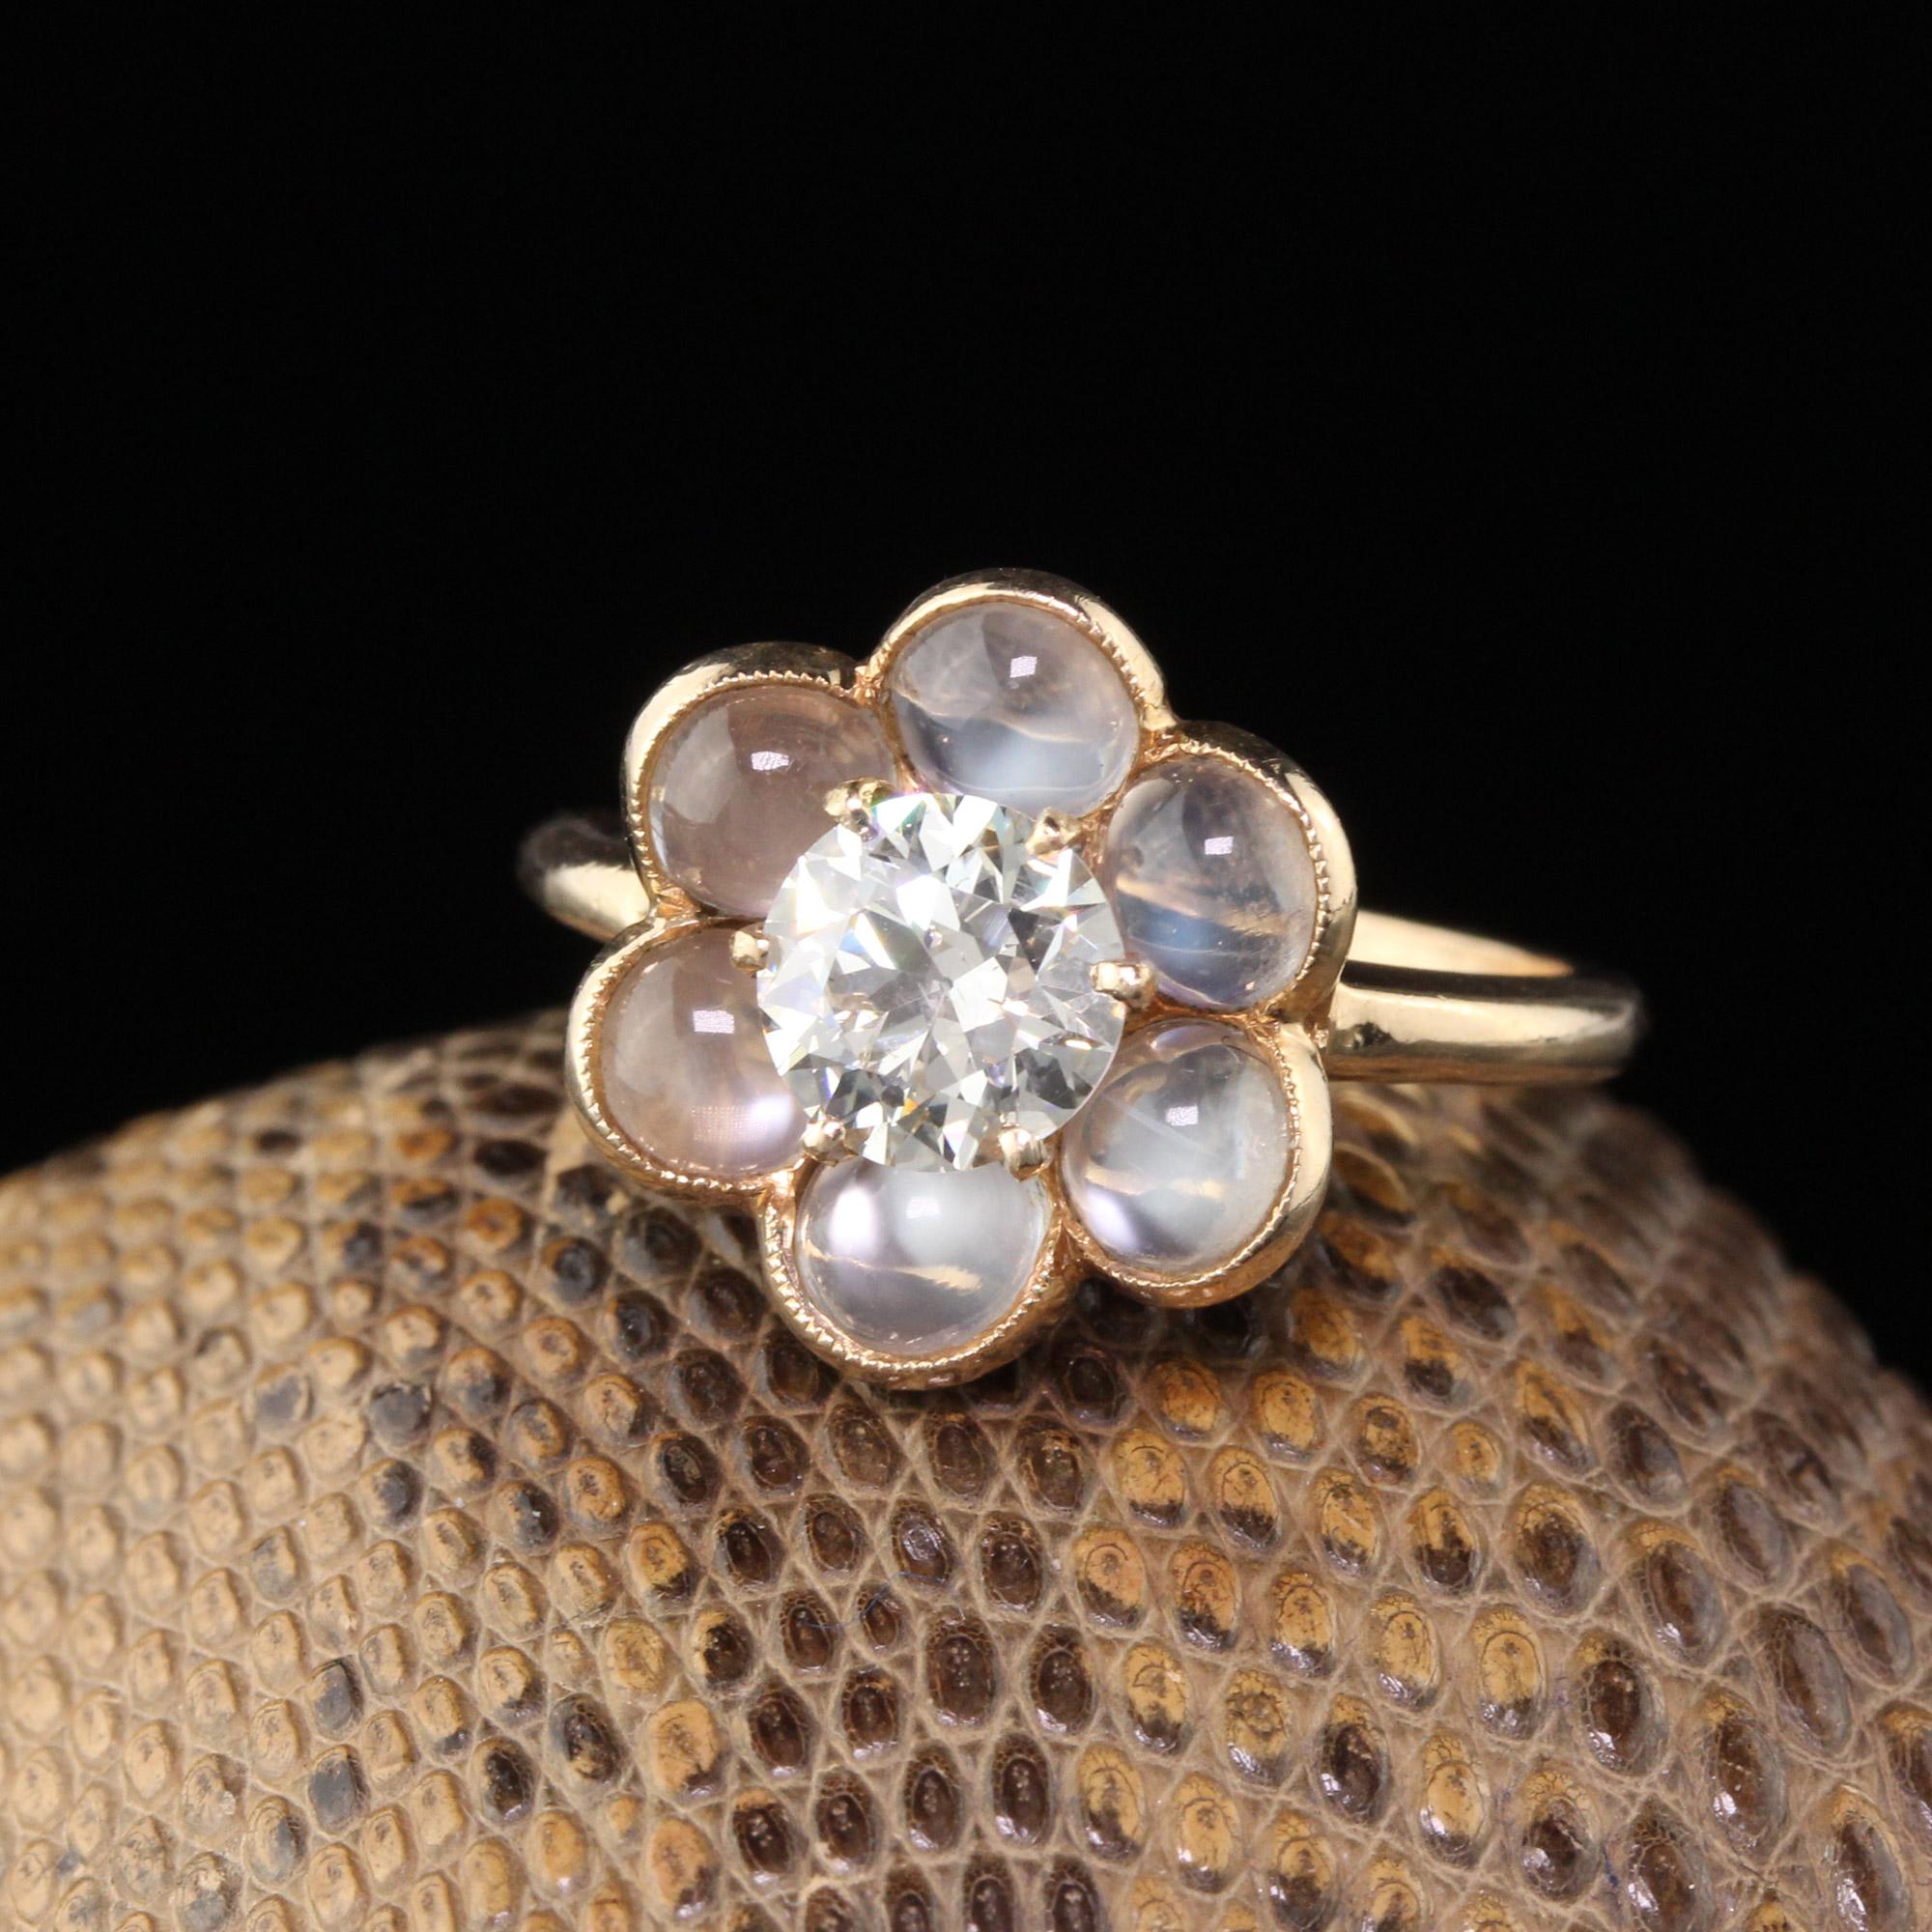 Stunning and very unique vintage engagement ring featuring a 0.88 ct old european cut diamond in the center surrounded by a halo of moonstones creating a flower shop. Magical!

#R0391

Metal: 14K Yellow Gold 

Weight: 3.2 Grams

Diamond Weight: 0.88